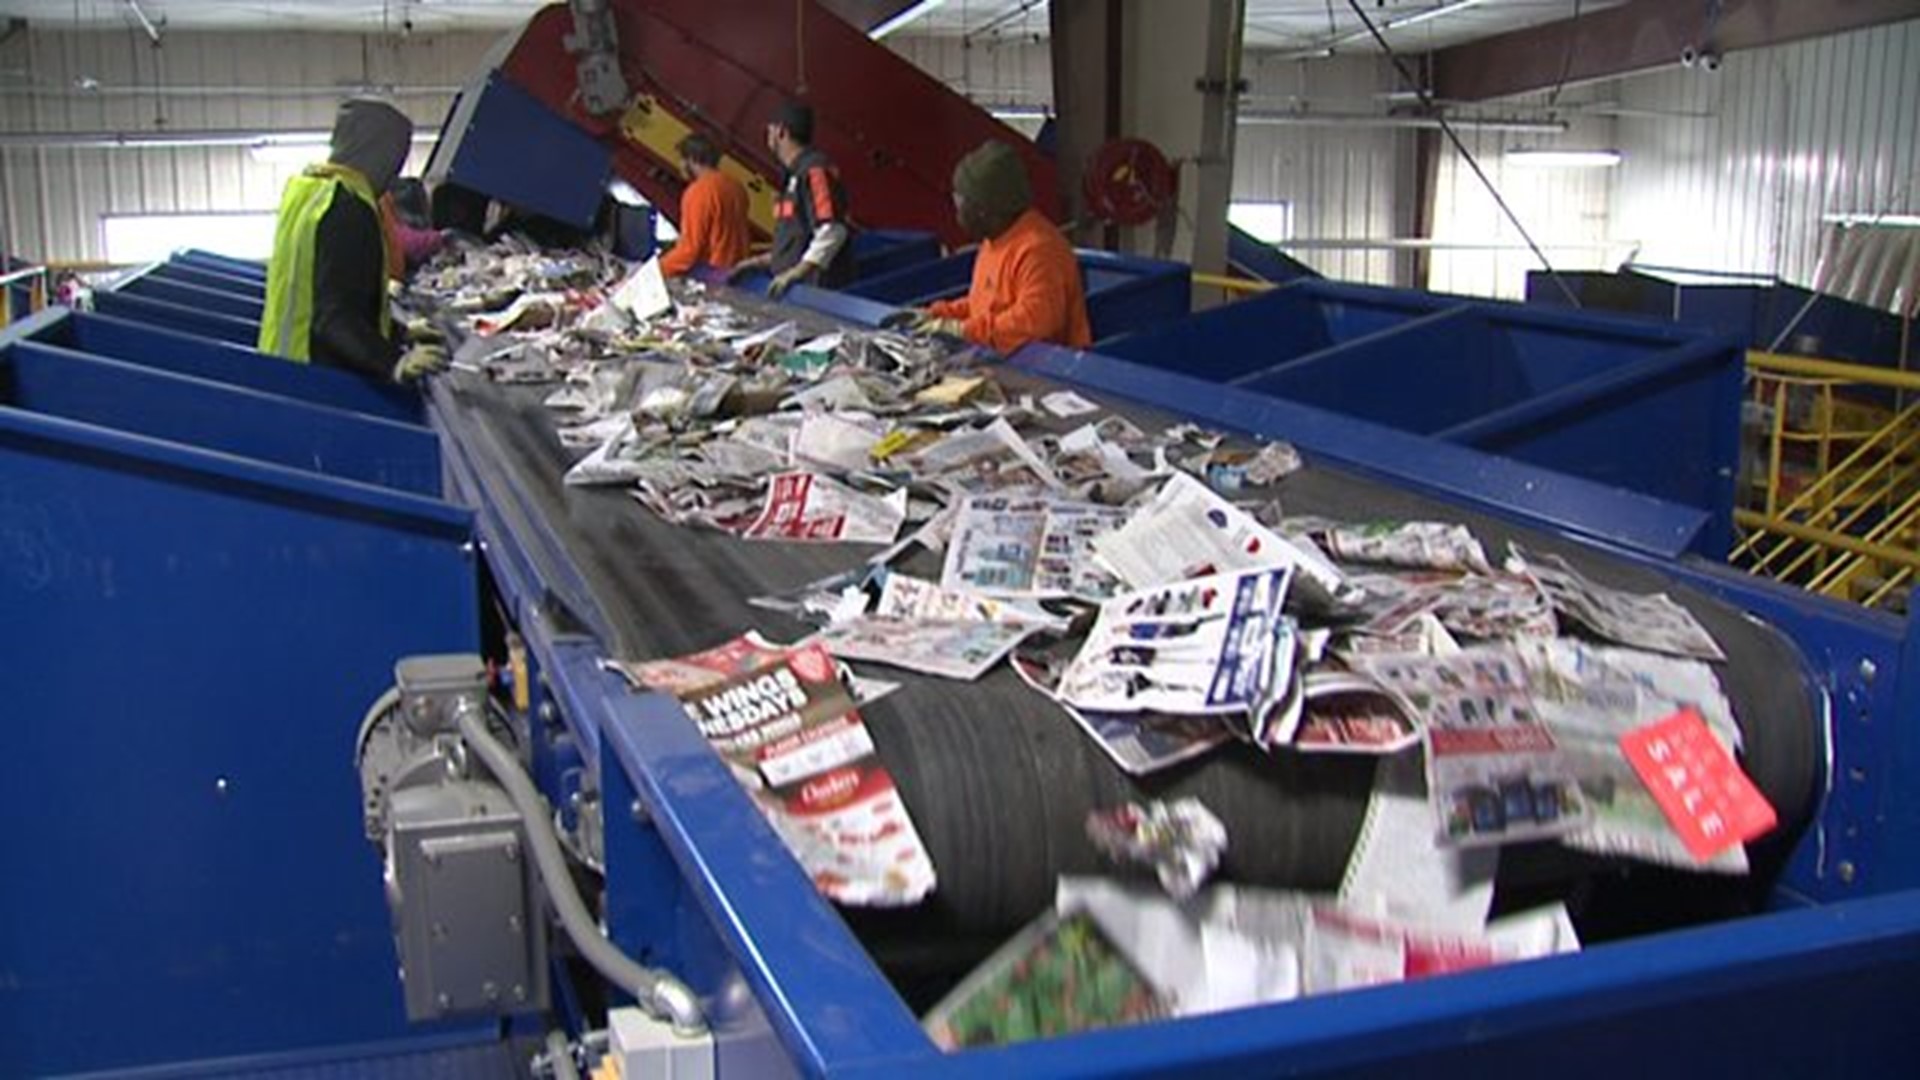 Scott County Recycling extending the life of landfill